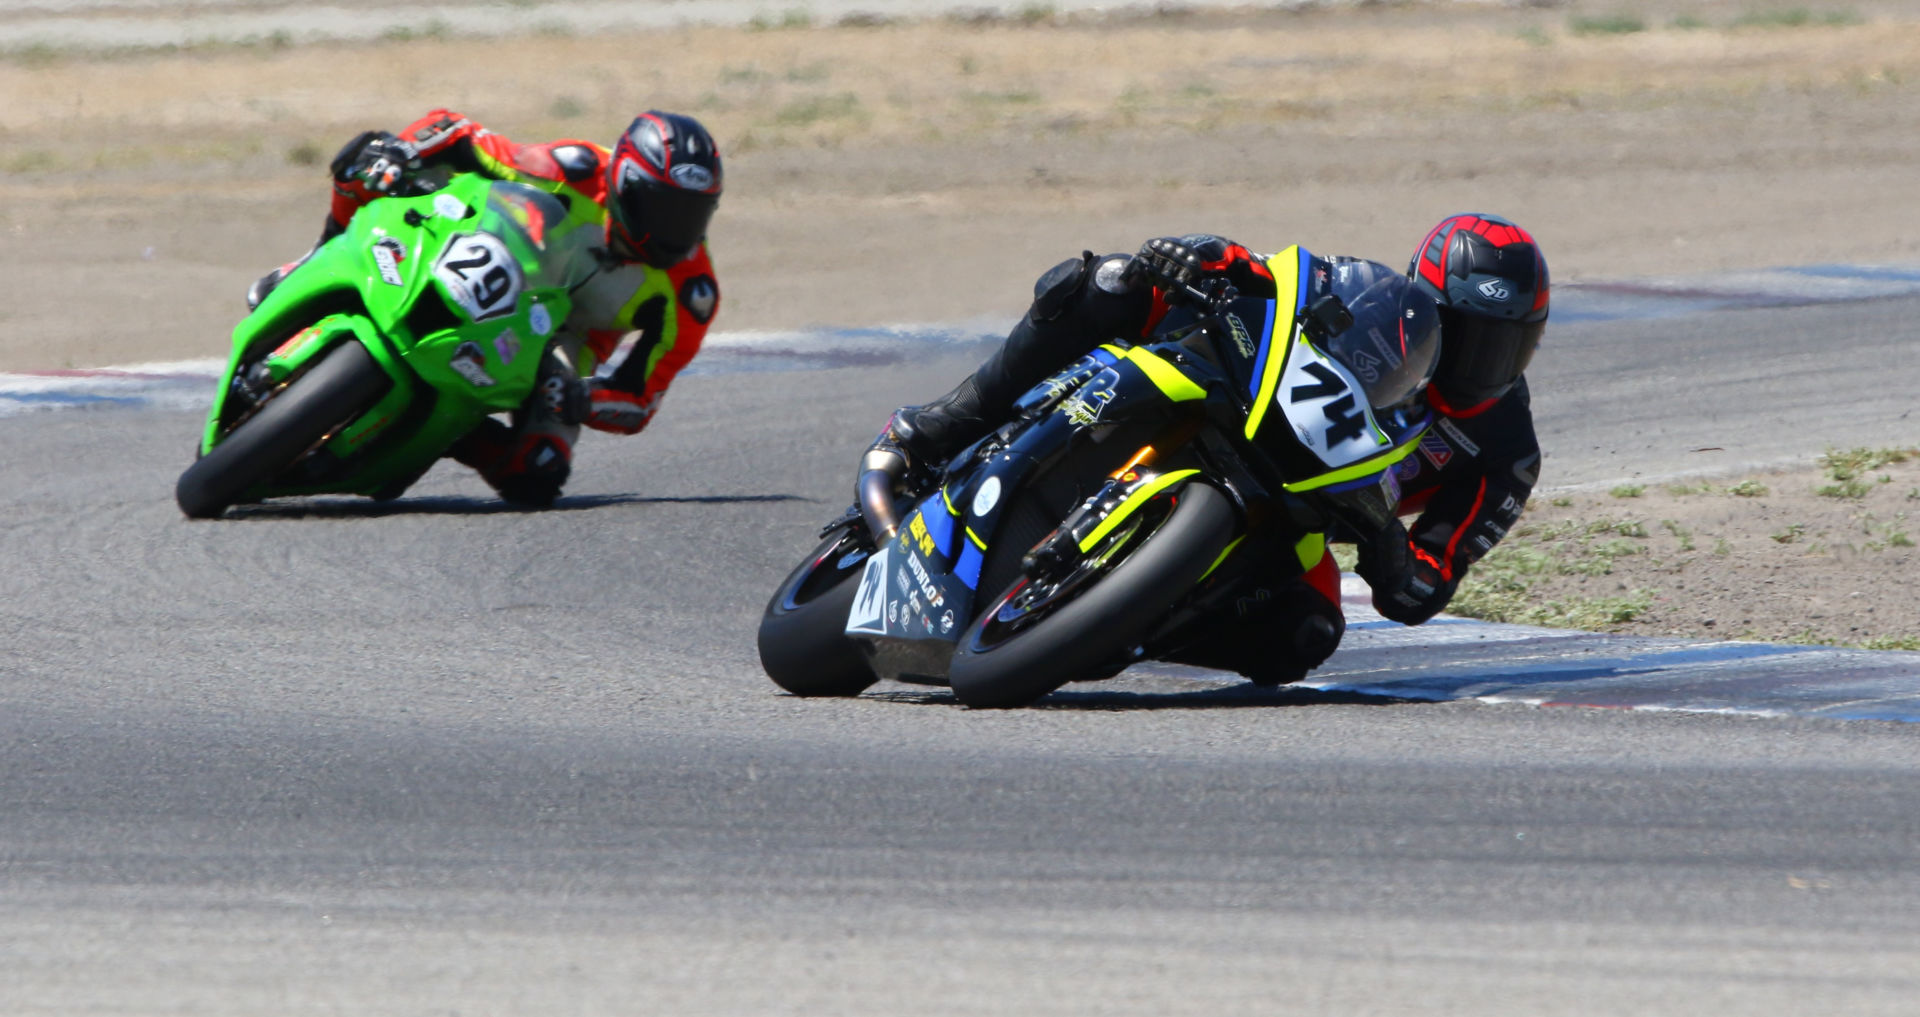 Bryce Prince (74) leads Jack Bakken (29) early in the 12-lap RiderzLaw Gold Cup race at Buttonwillow Raceway Park. Photo by CaliPhotography.com, courtesy CRA.